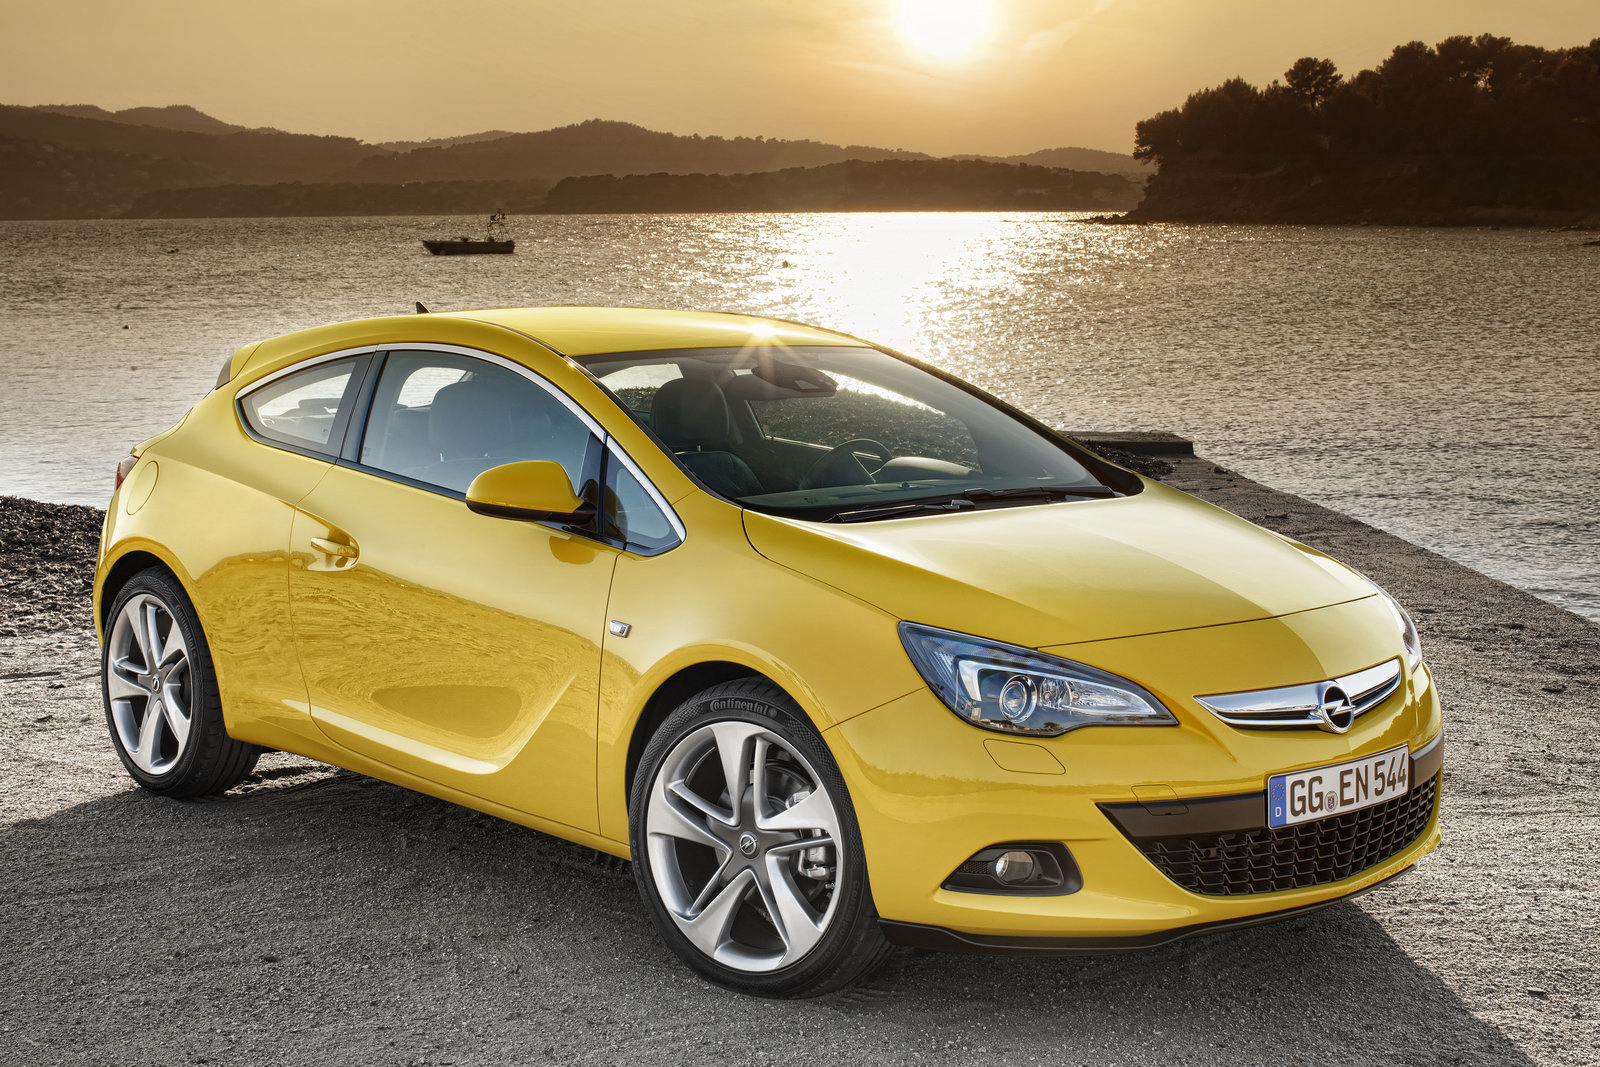 Opel Officially Reveals 2012 Astra GTC, High-Po OPC Coming Next Year